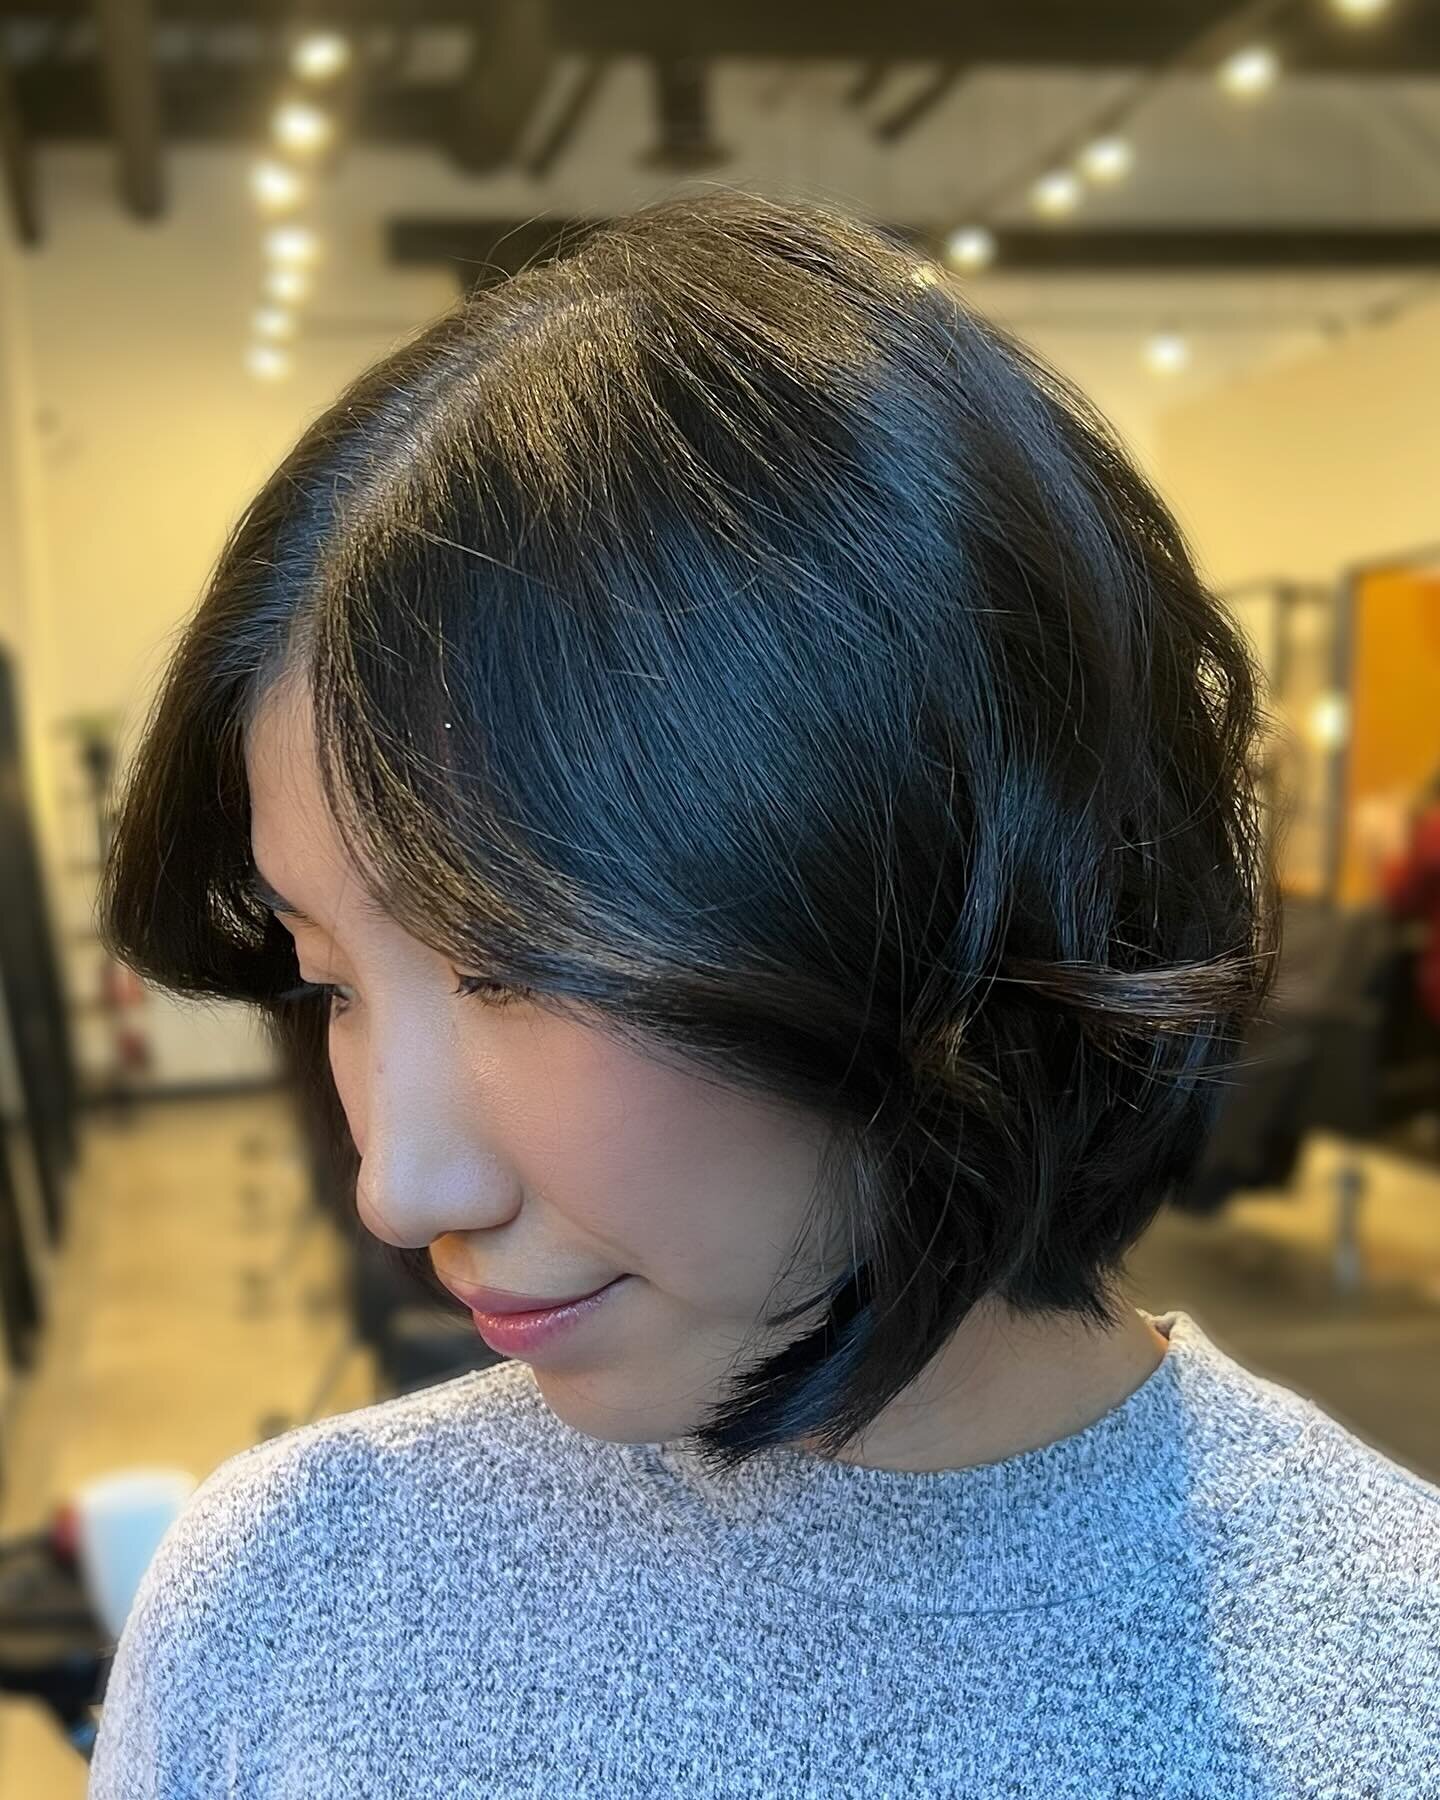 I love this bob on her! She wanted to cut 12 inches off to donate to a charity and I think the results are so flattering. Who else is ready for change? What are some ideas you&rsquo;re playing with but haven&rsquo;t pulled the trigger on? It can be s